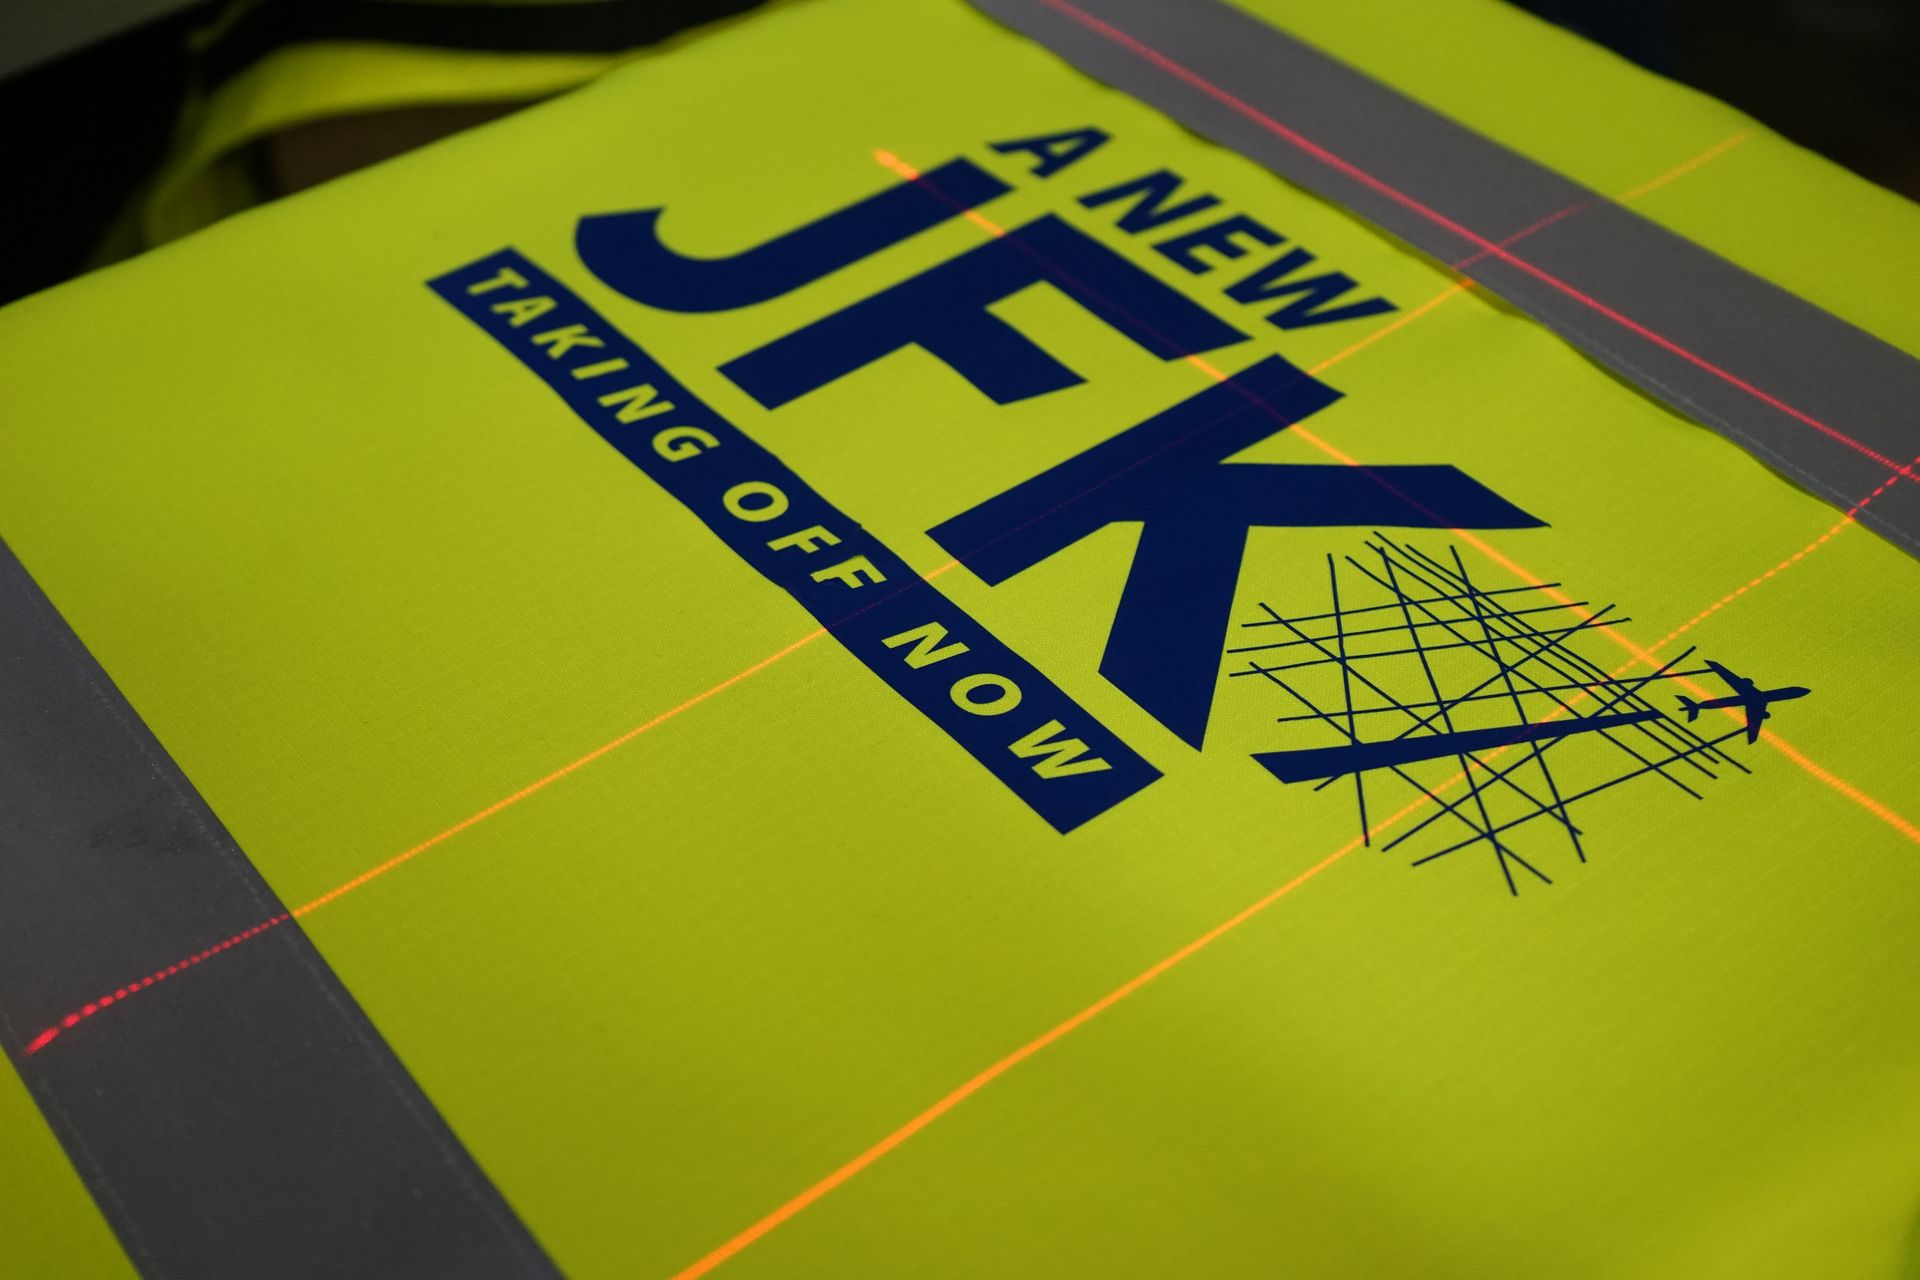 A striking neon green safety vest is adorned with the phrase 'A NEW JFK TAKING OFF NOW' in bold navy blue text. The vest features a lively graphic of flight paths and an airplane silhouette, representing the significant advancements and updates unfolding at JFK Airport.